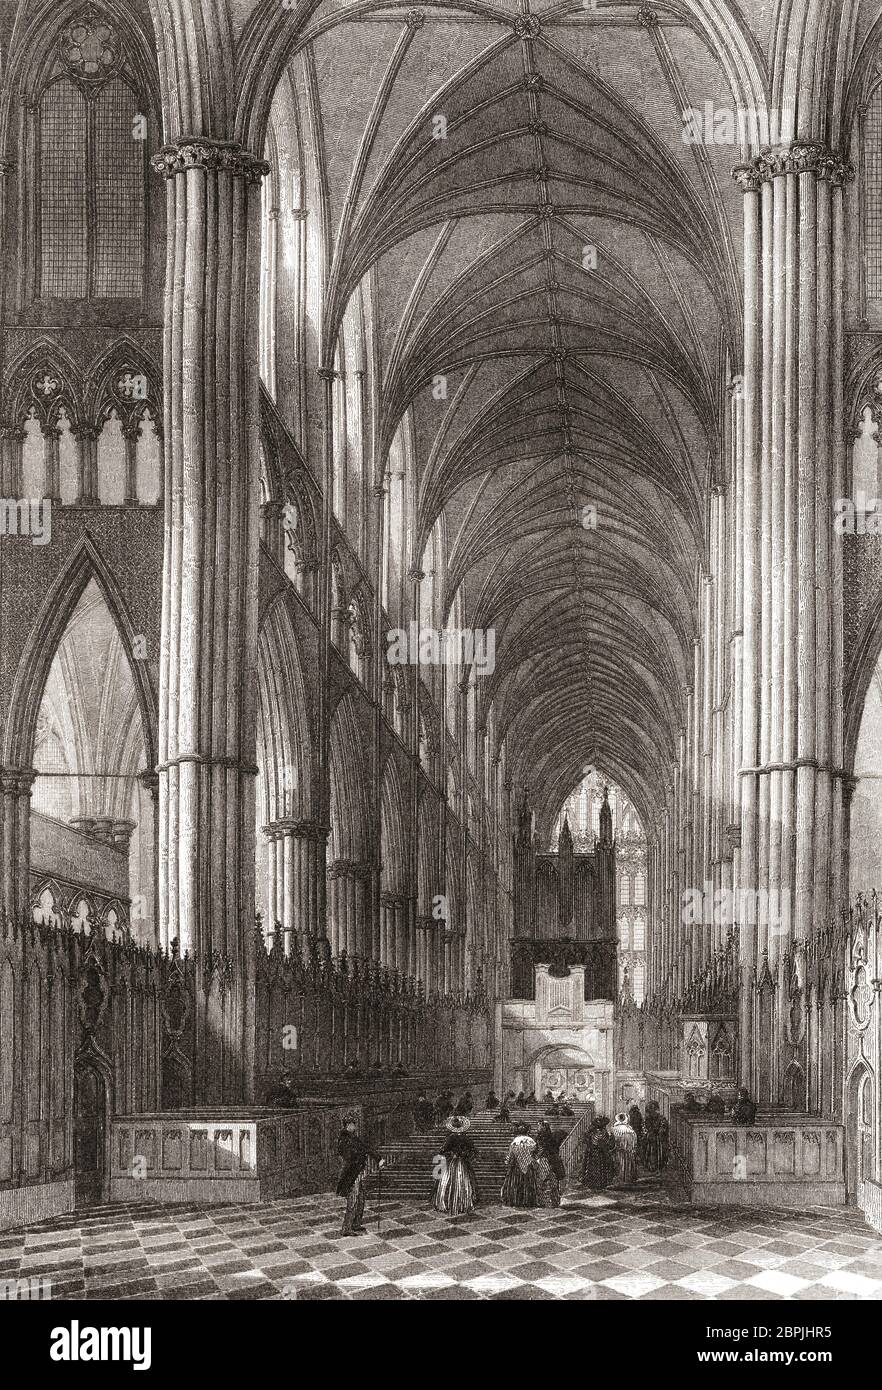 Interior of Westminster Abbey, City of Westminster, London, England, 19th century.  From The History of London: Illustrated by Views in London and Westminster, published c.1838. Stock Photo